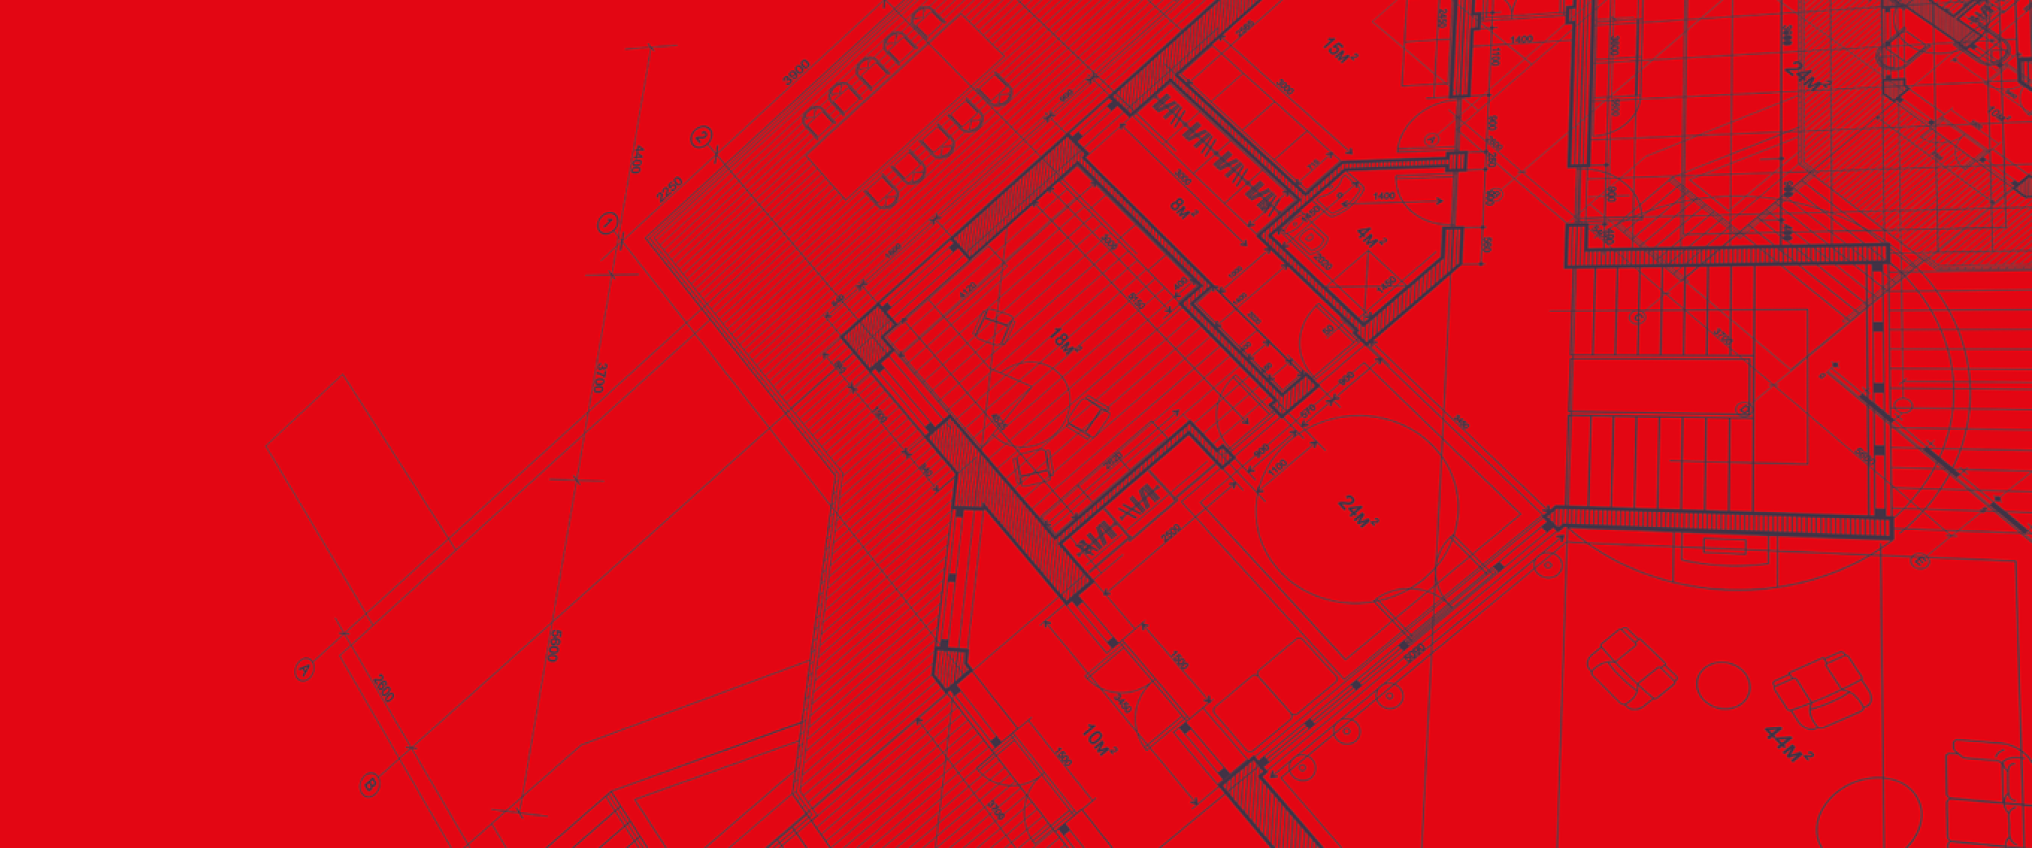 red background with blueprint diagram